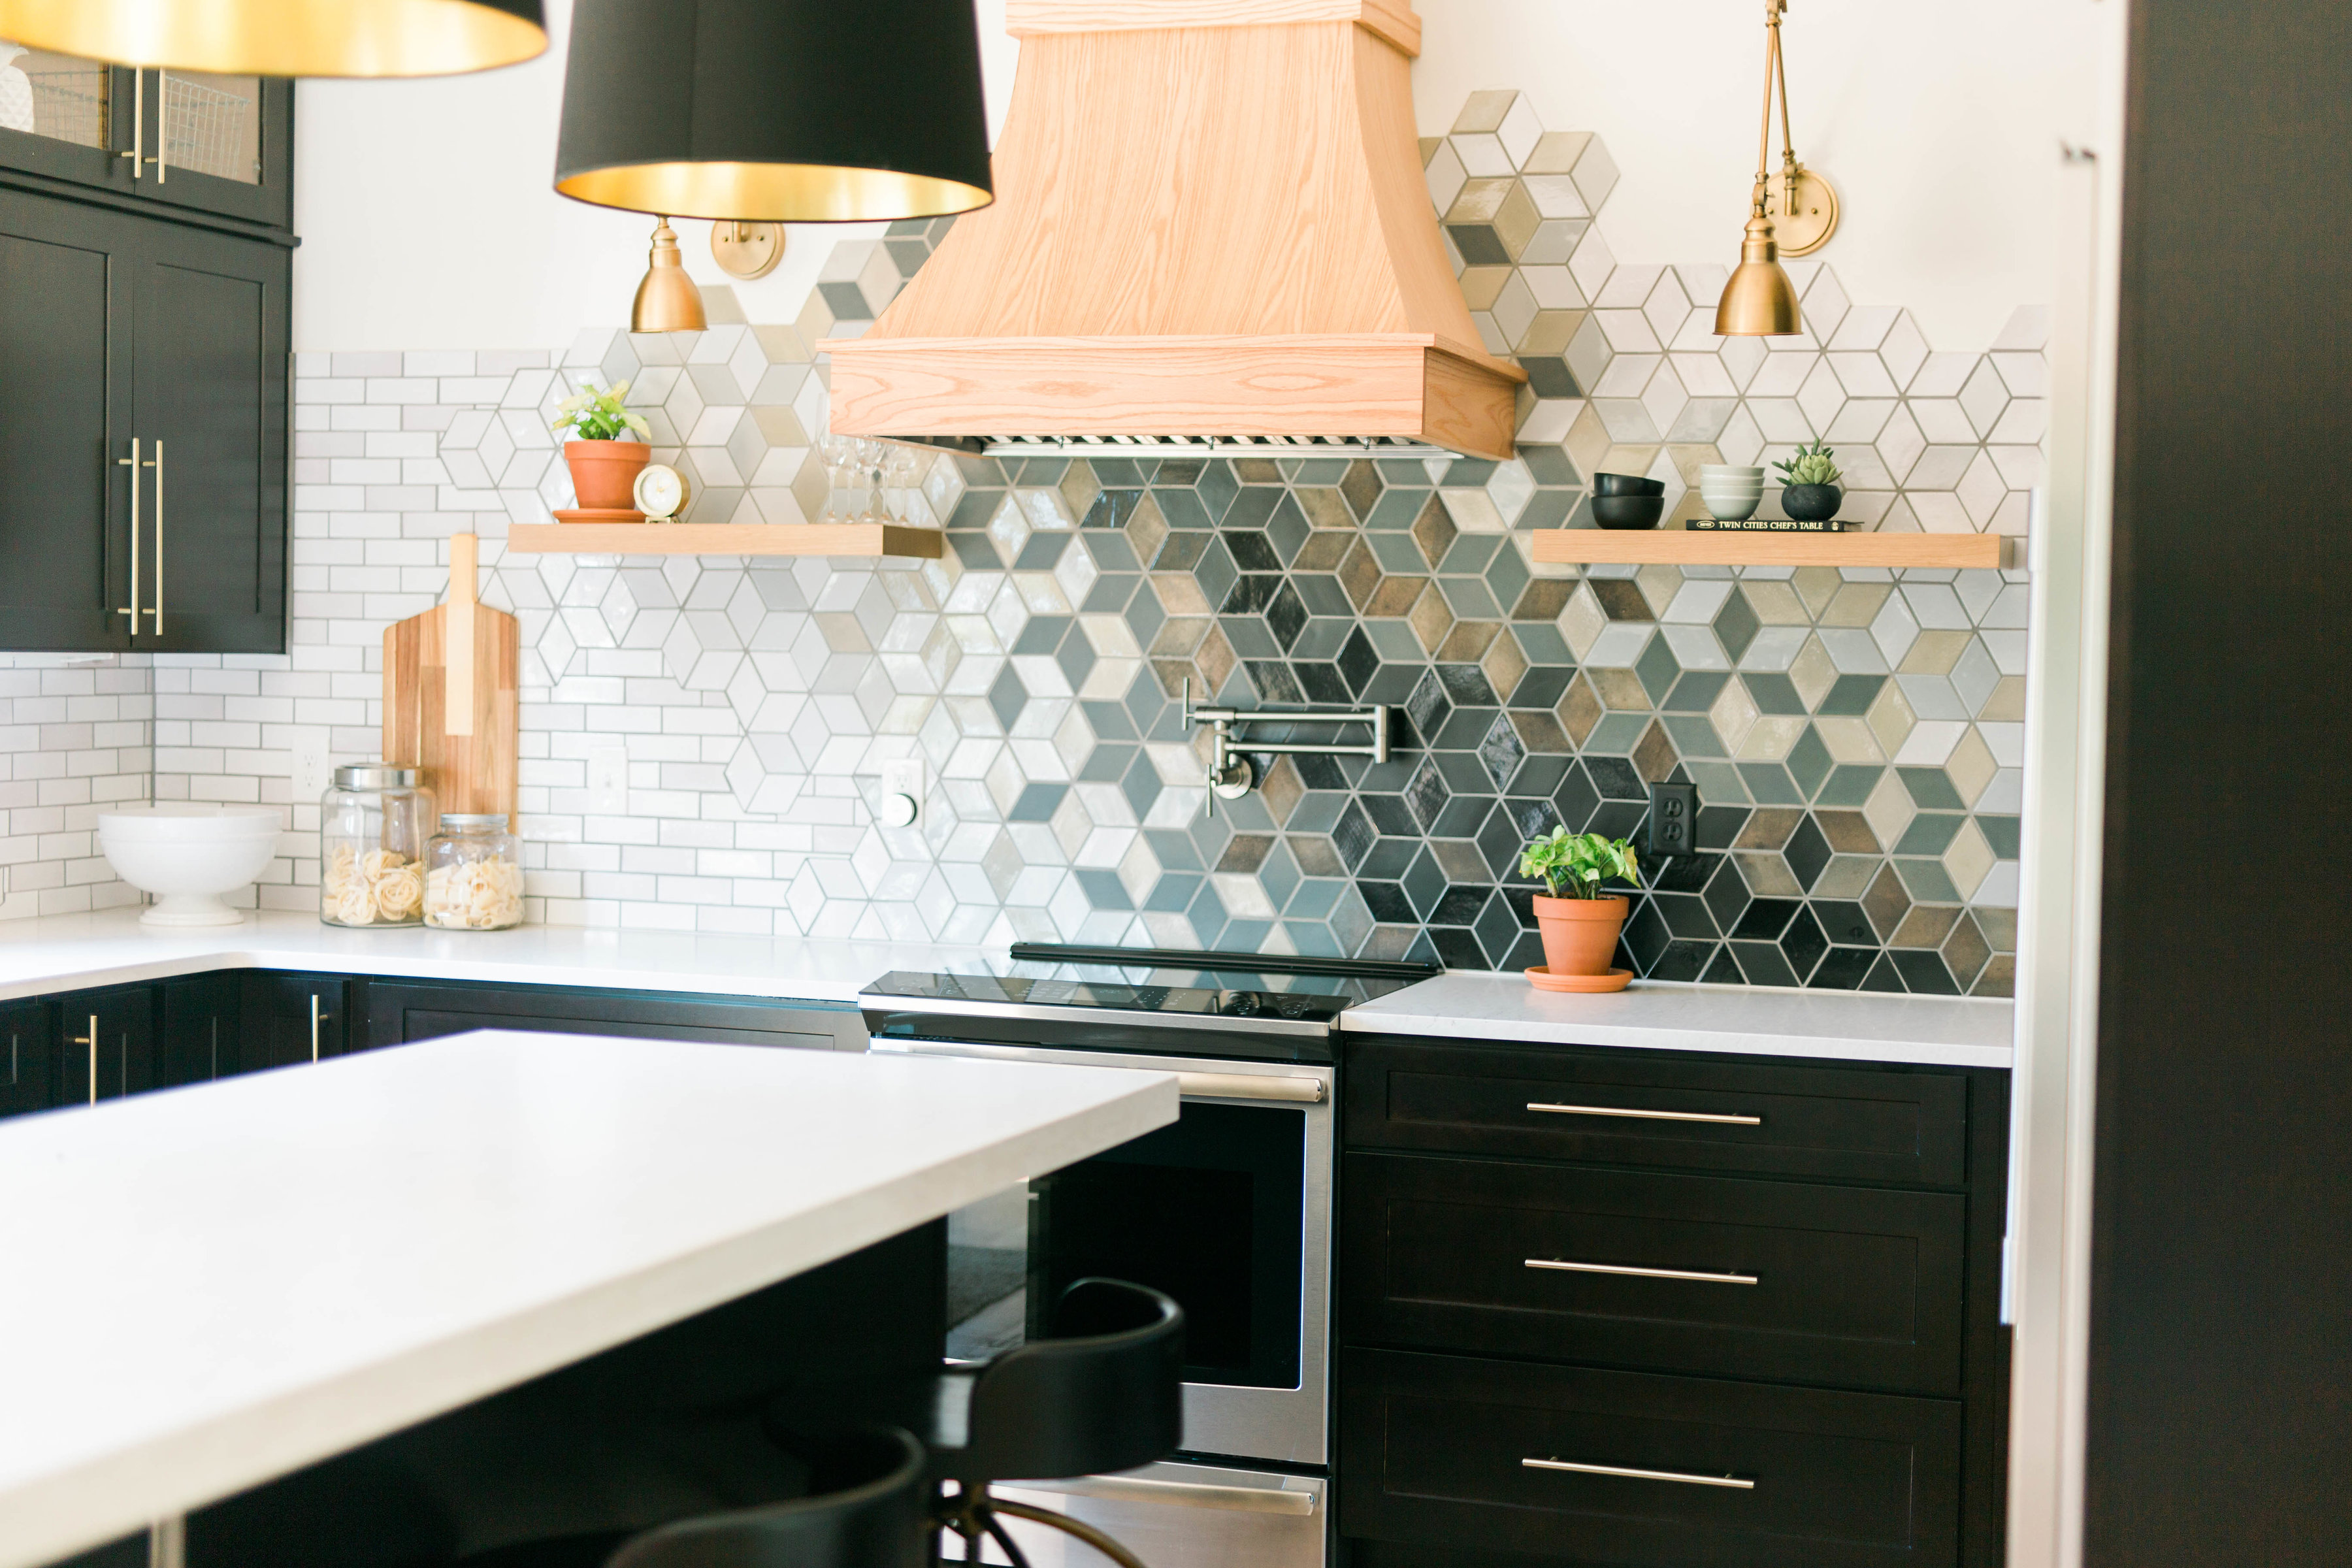 5 Countertop And Backsplash Ideas To